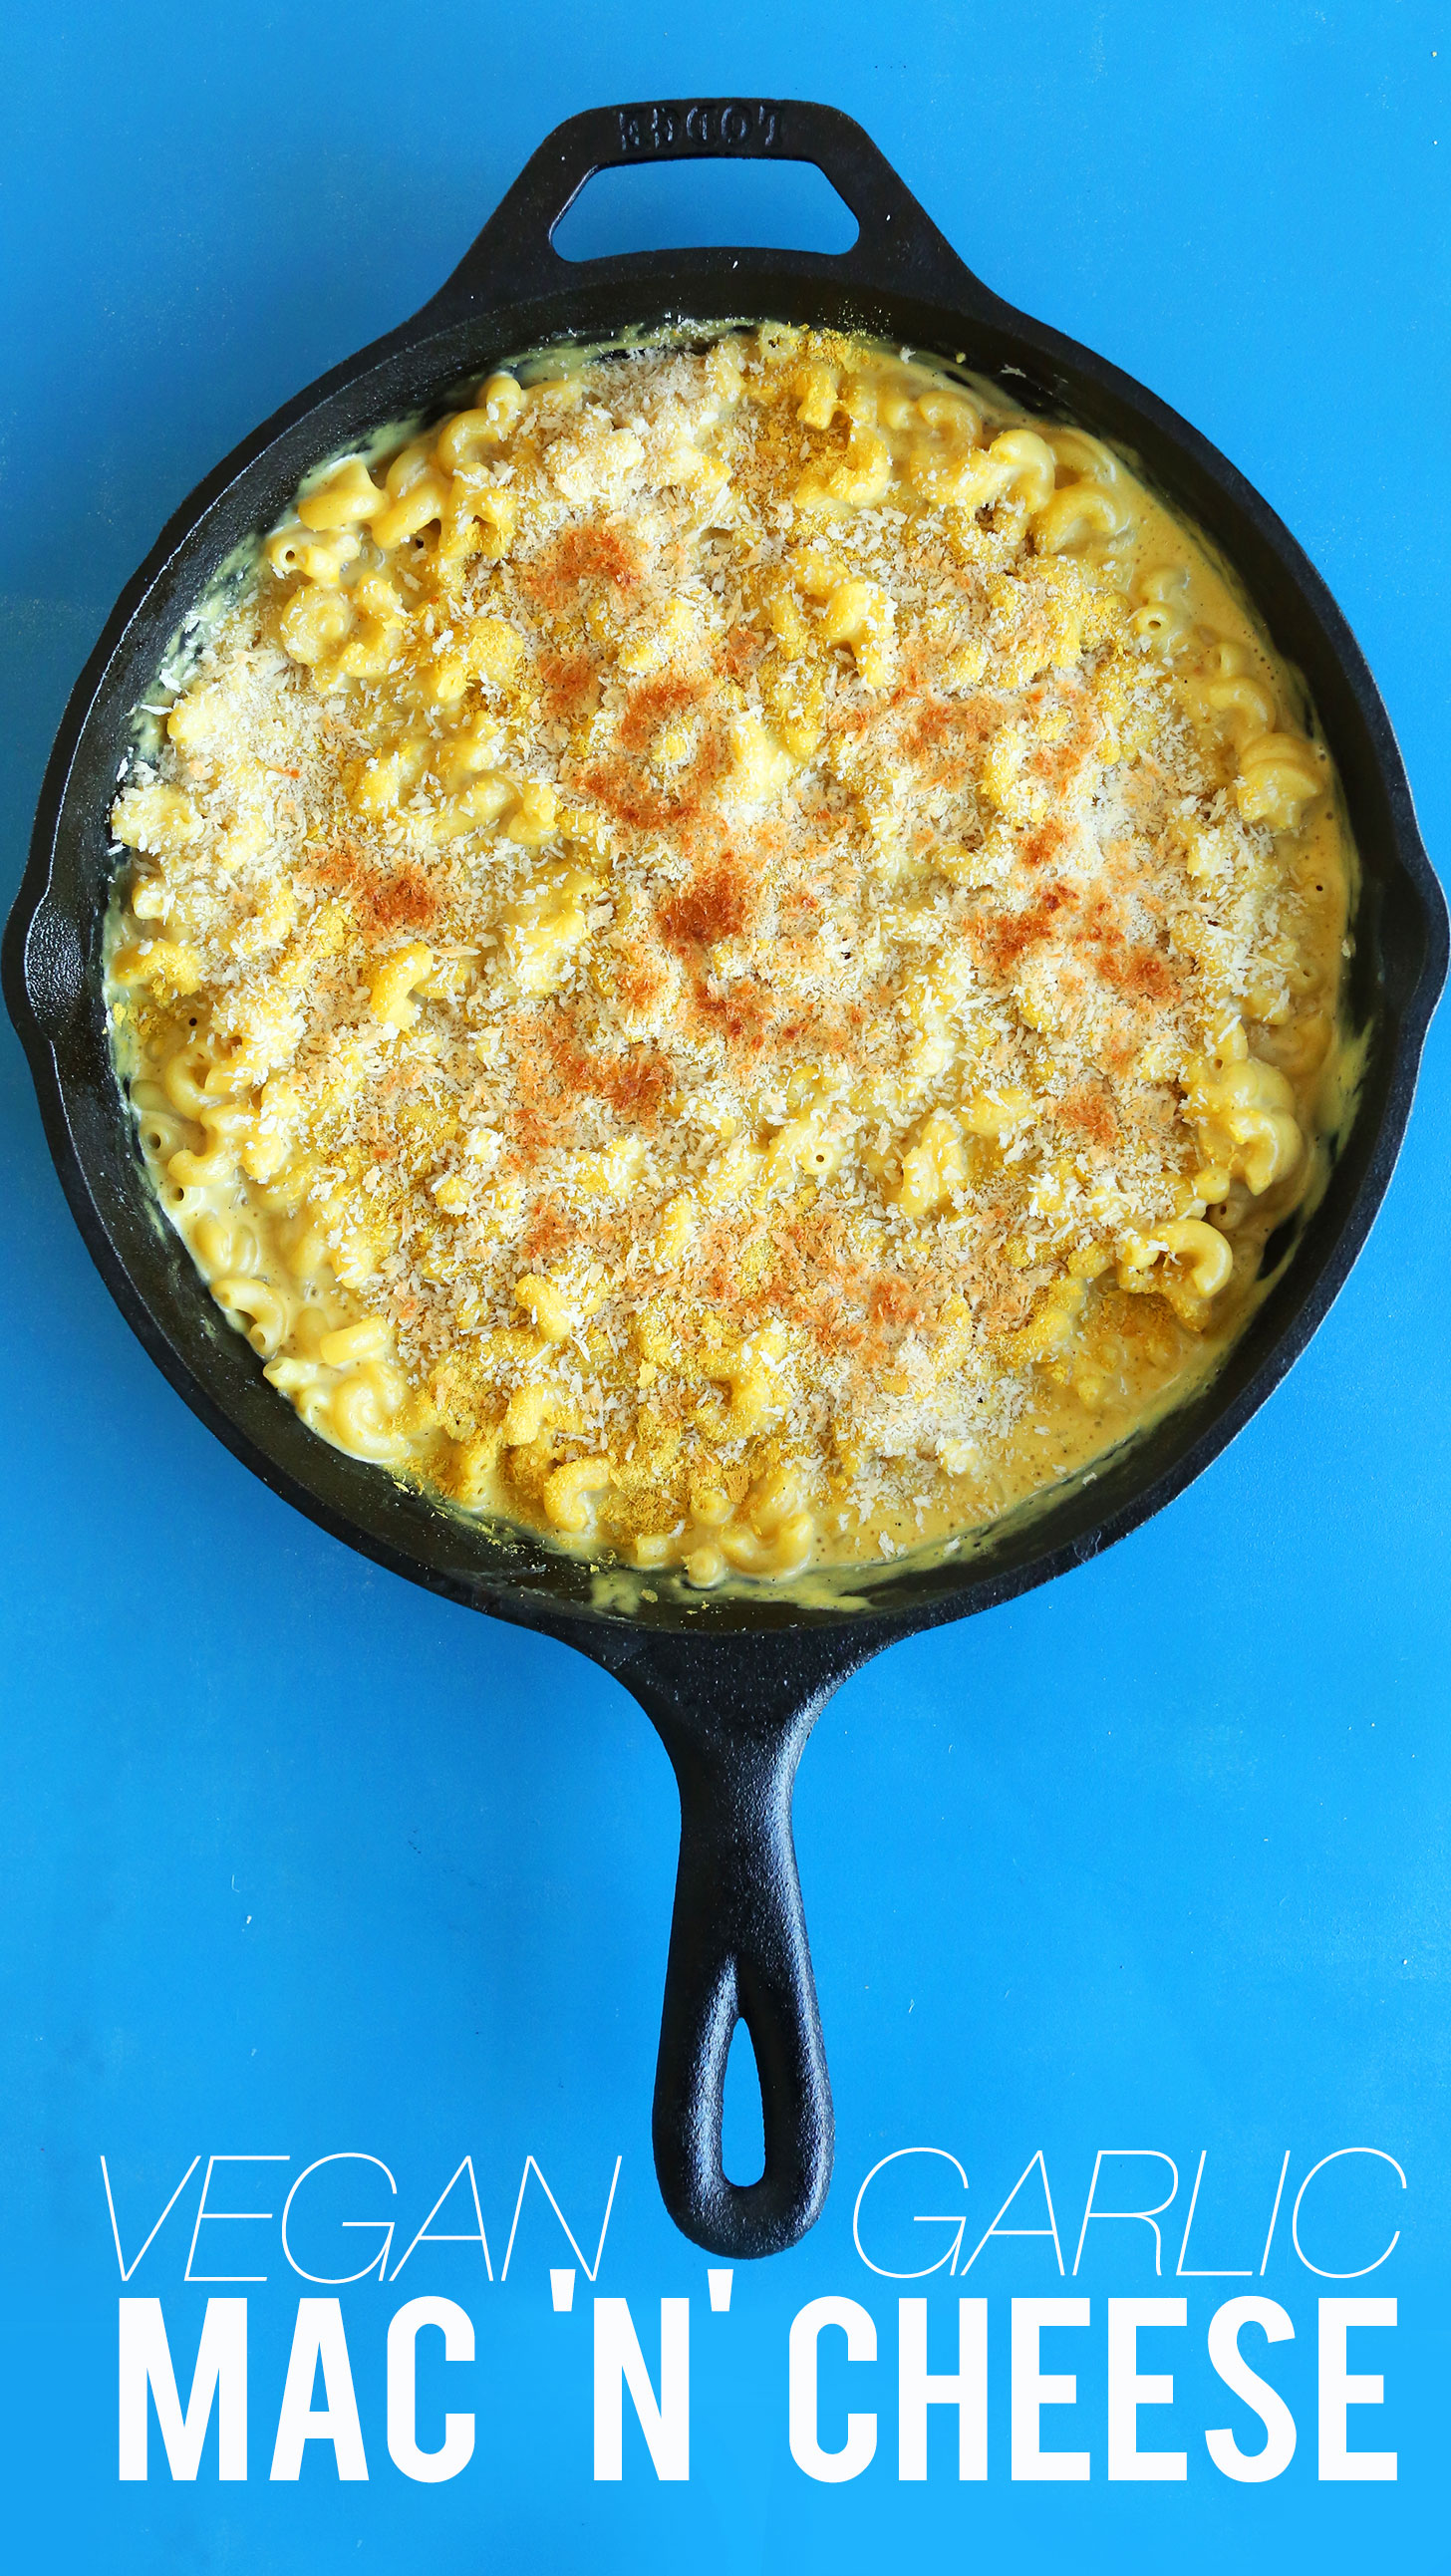 Cast-iron skillet filled with our recipe for easy Vegan Garlic Mac n Cheese